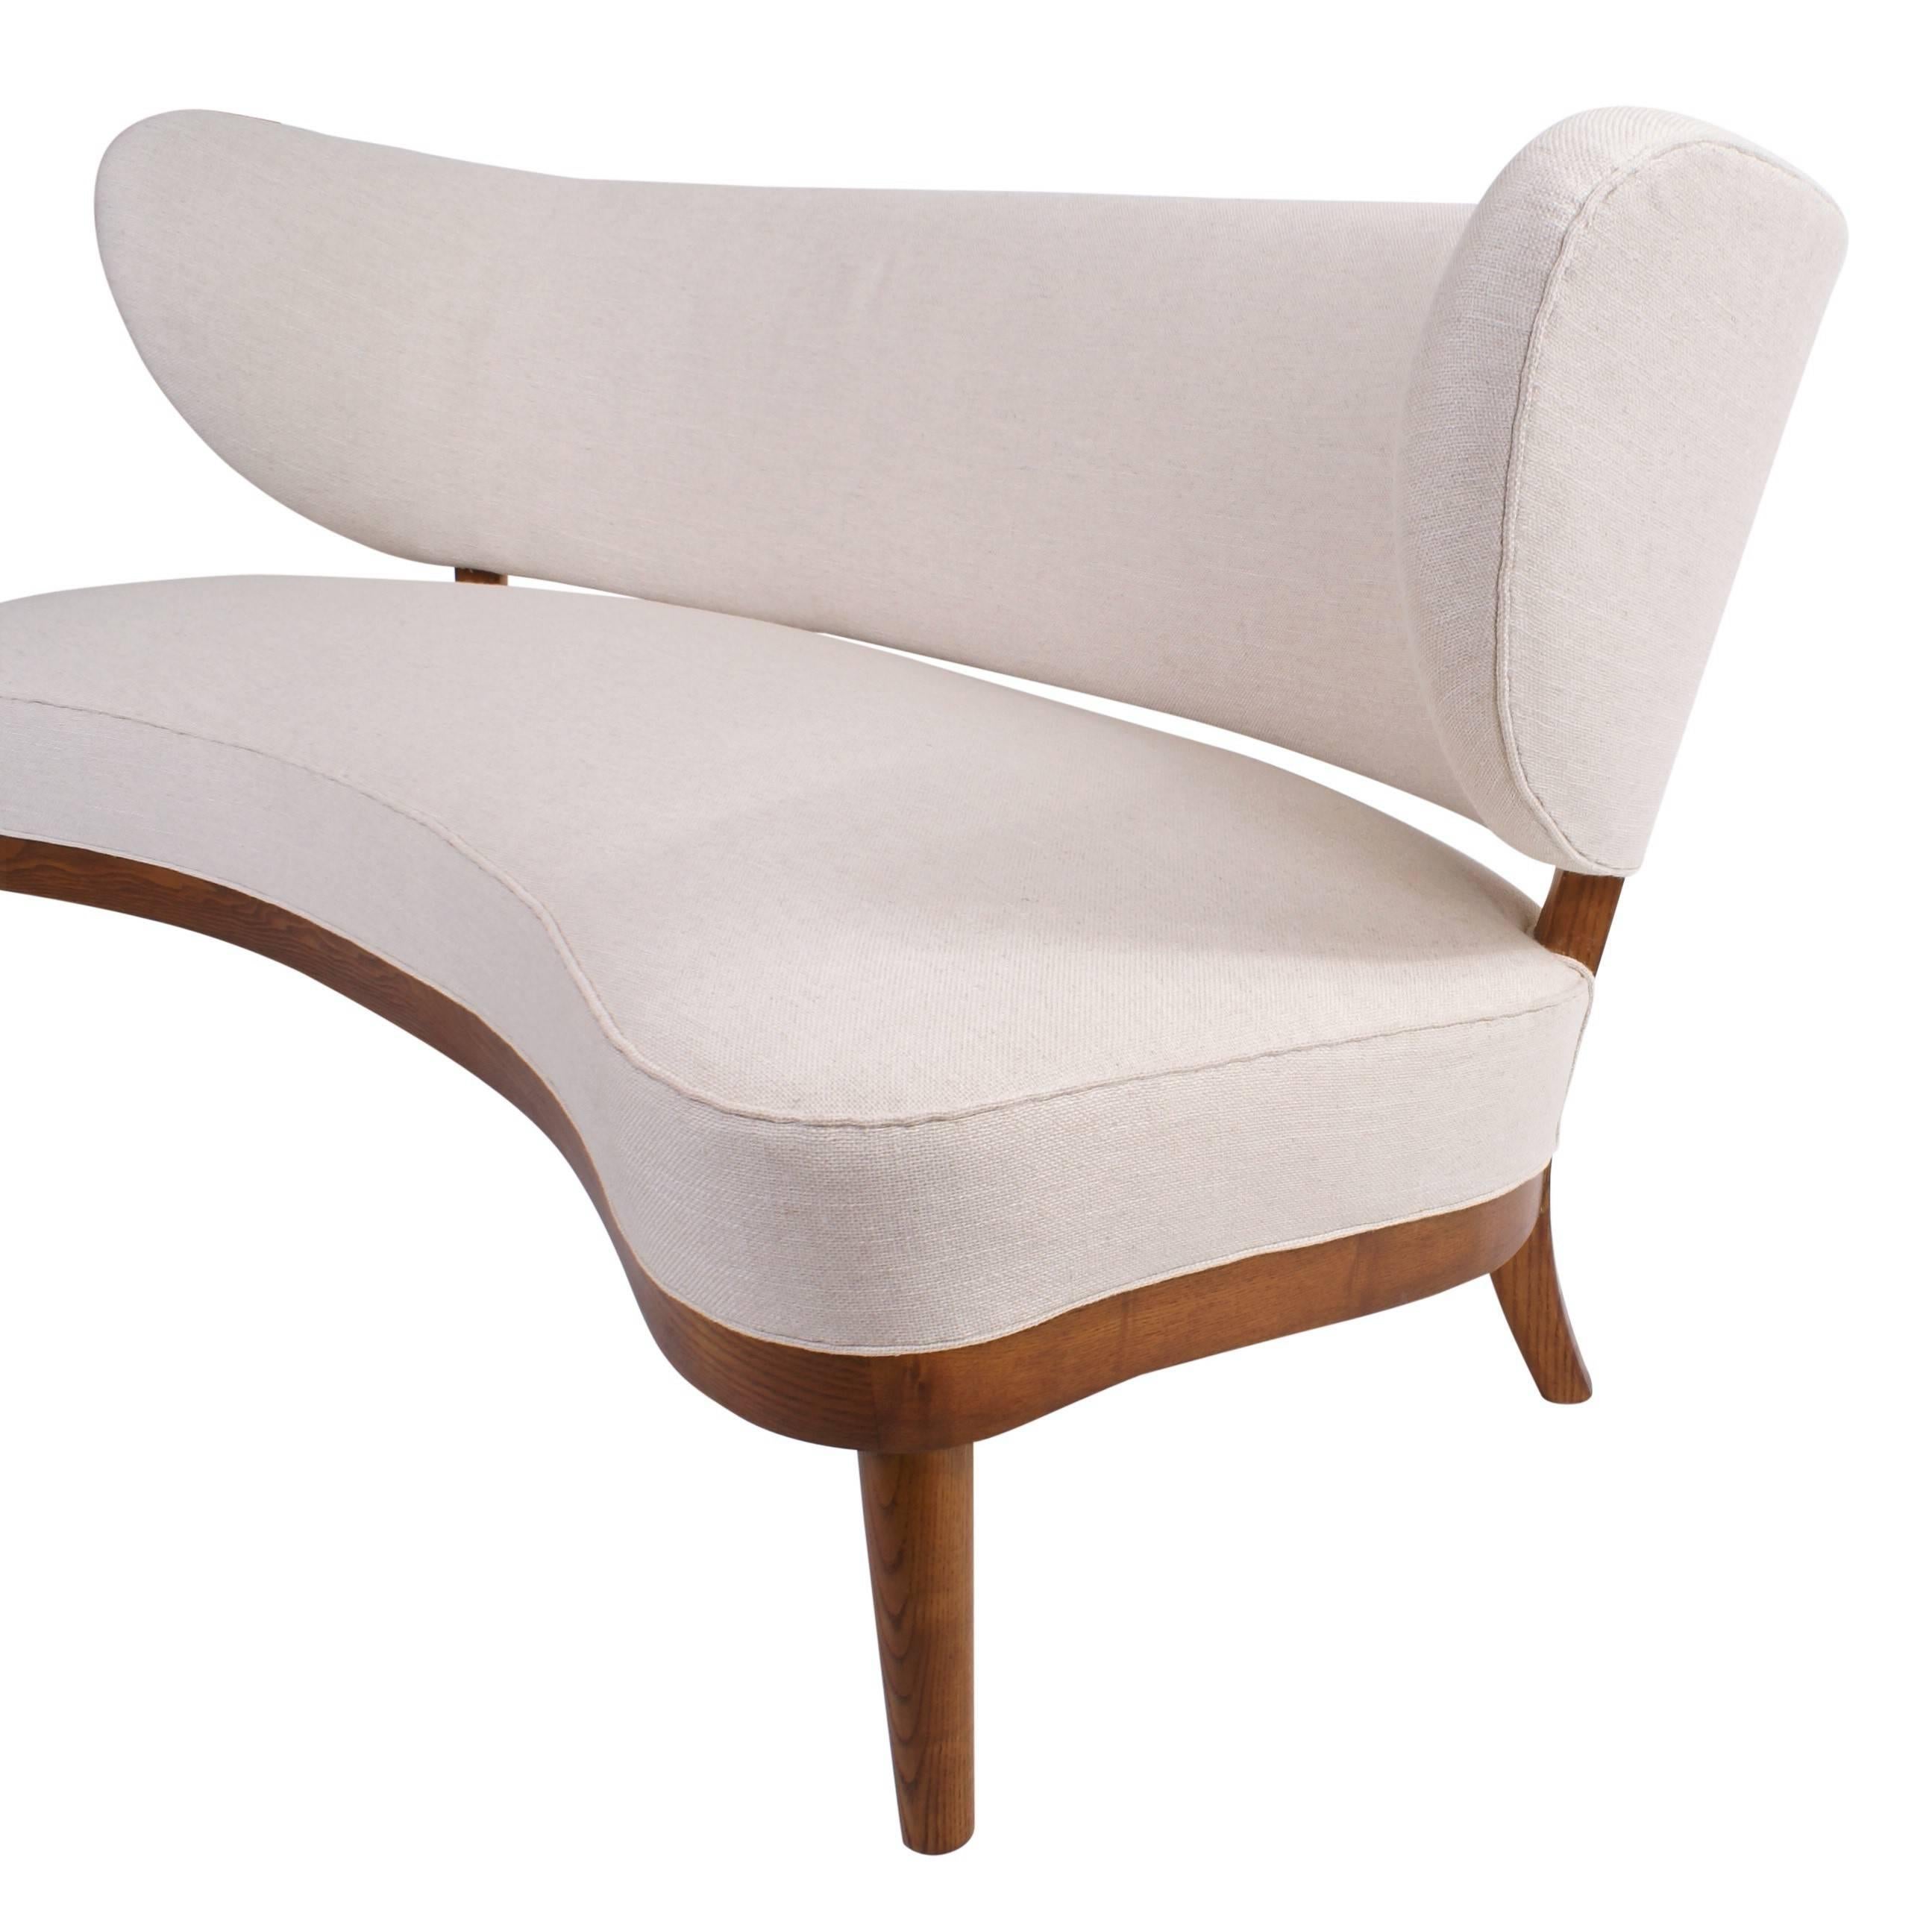 Swedish Otto Schulz Sculptural Sofa for Jio Mobler, 1950s For Sale